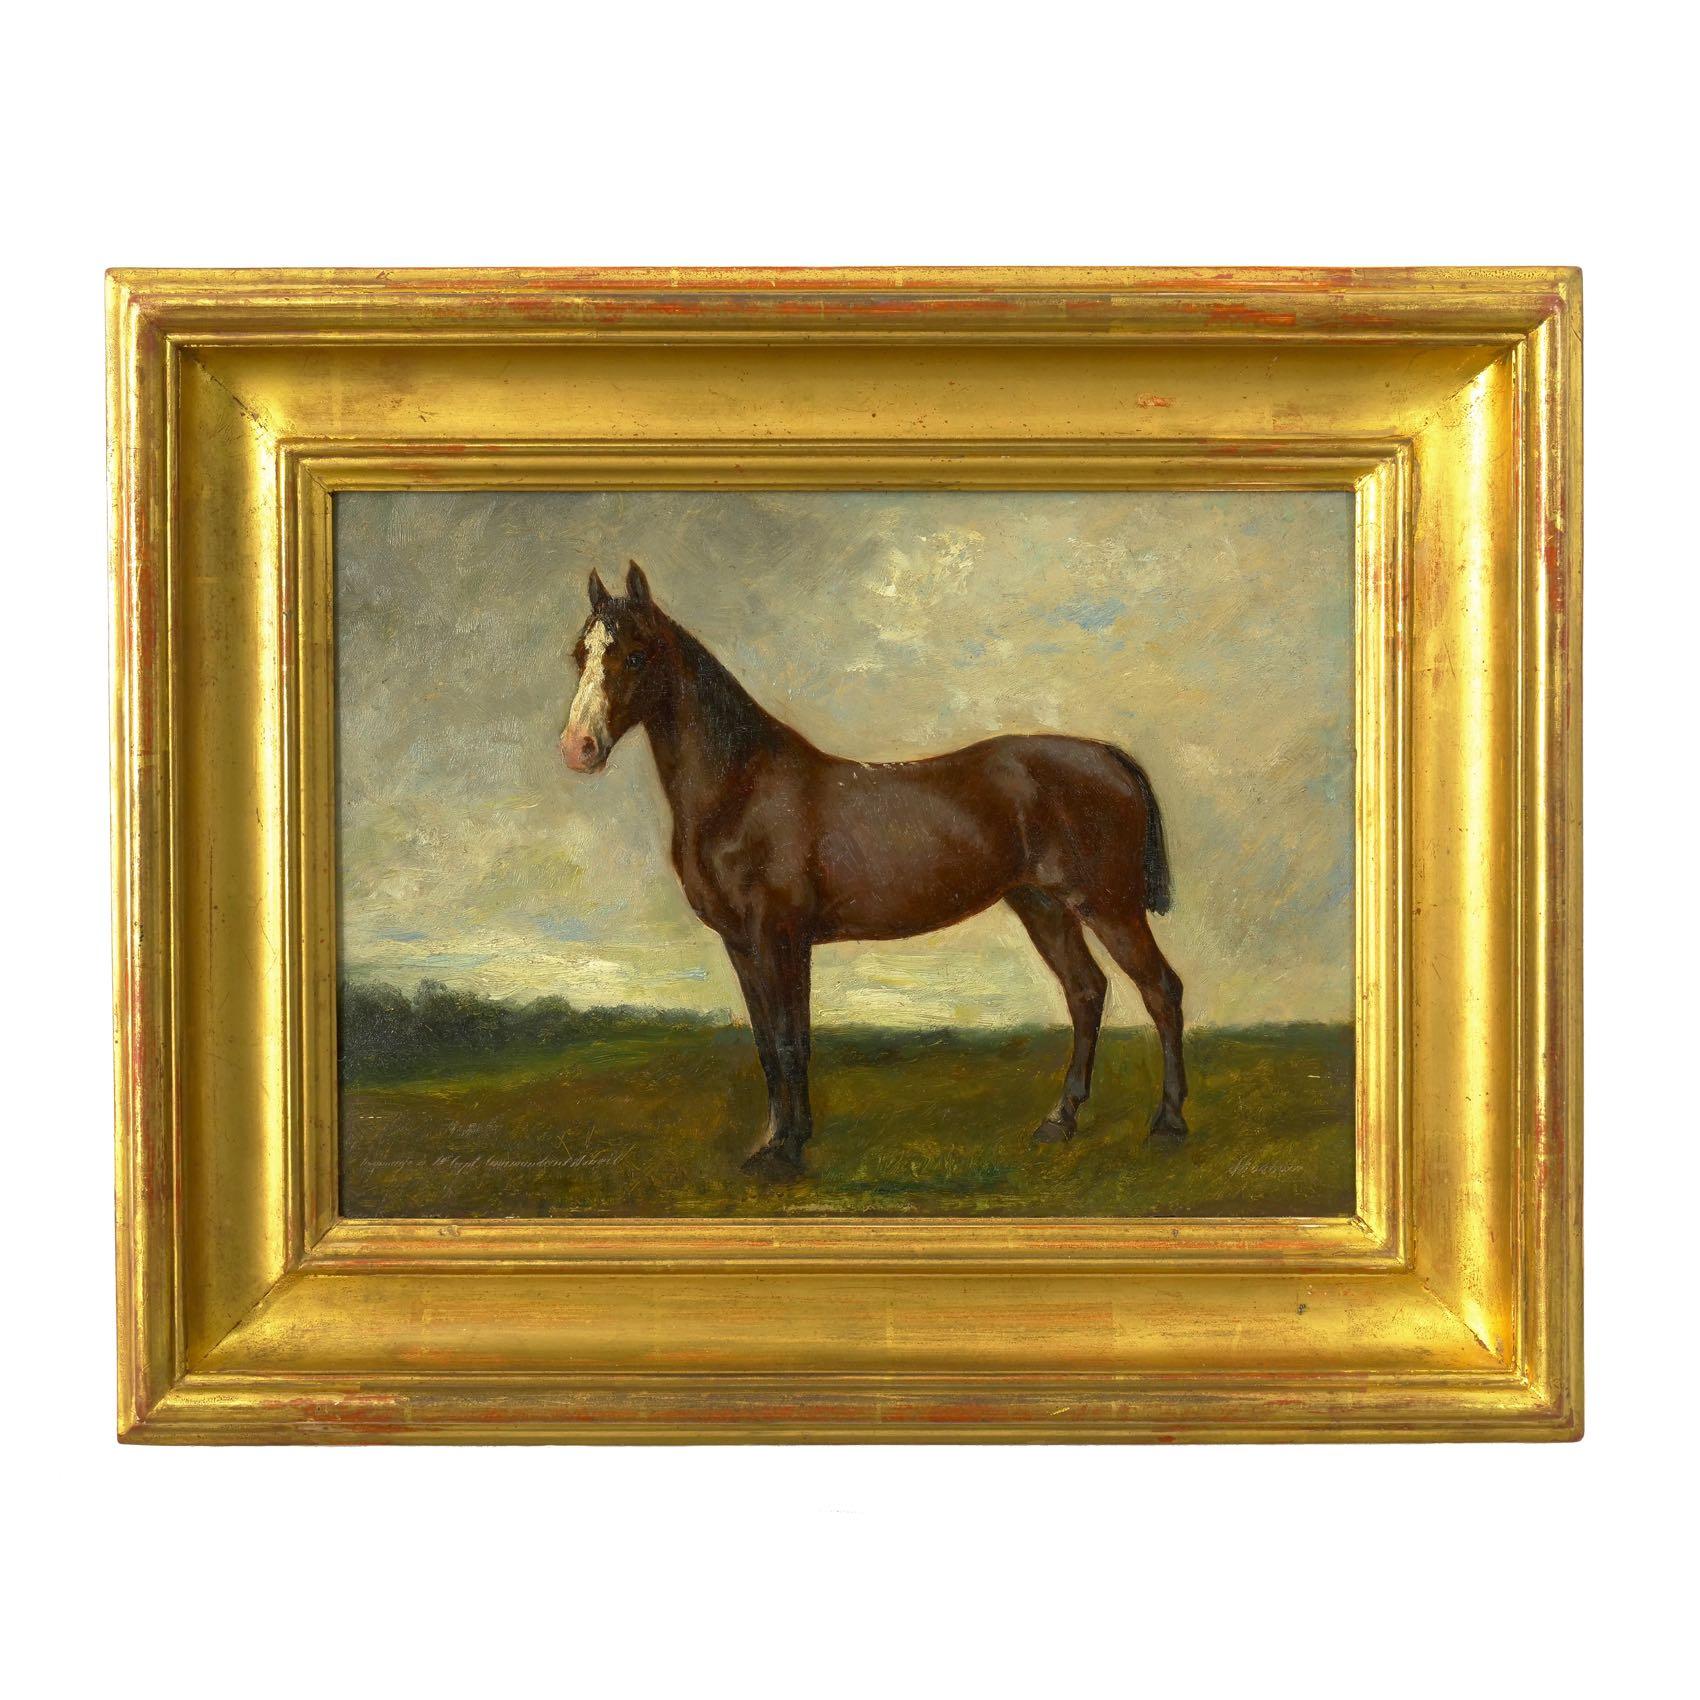 A moody and romantic work, this painting captures a thoroughbred standing before a Stark landscape under a gloomy sky. There is a serenity to the painting with soft light surrounding the horse as he stands large above the observer. Partially